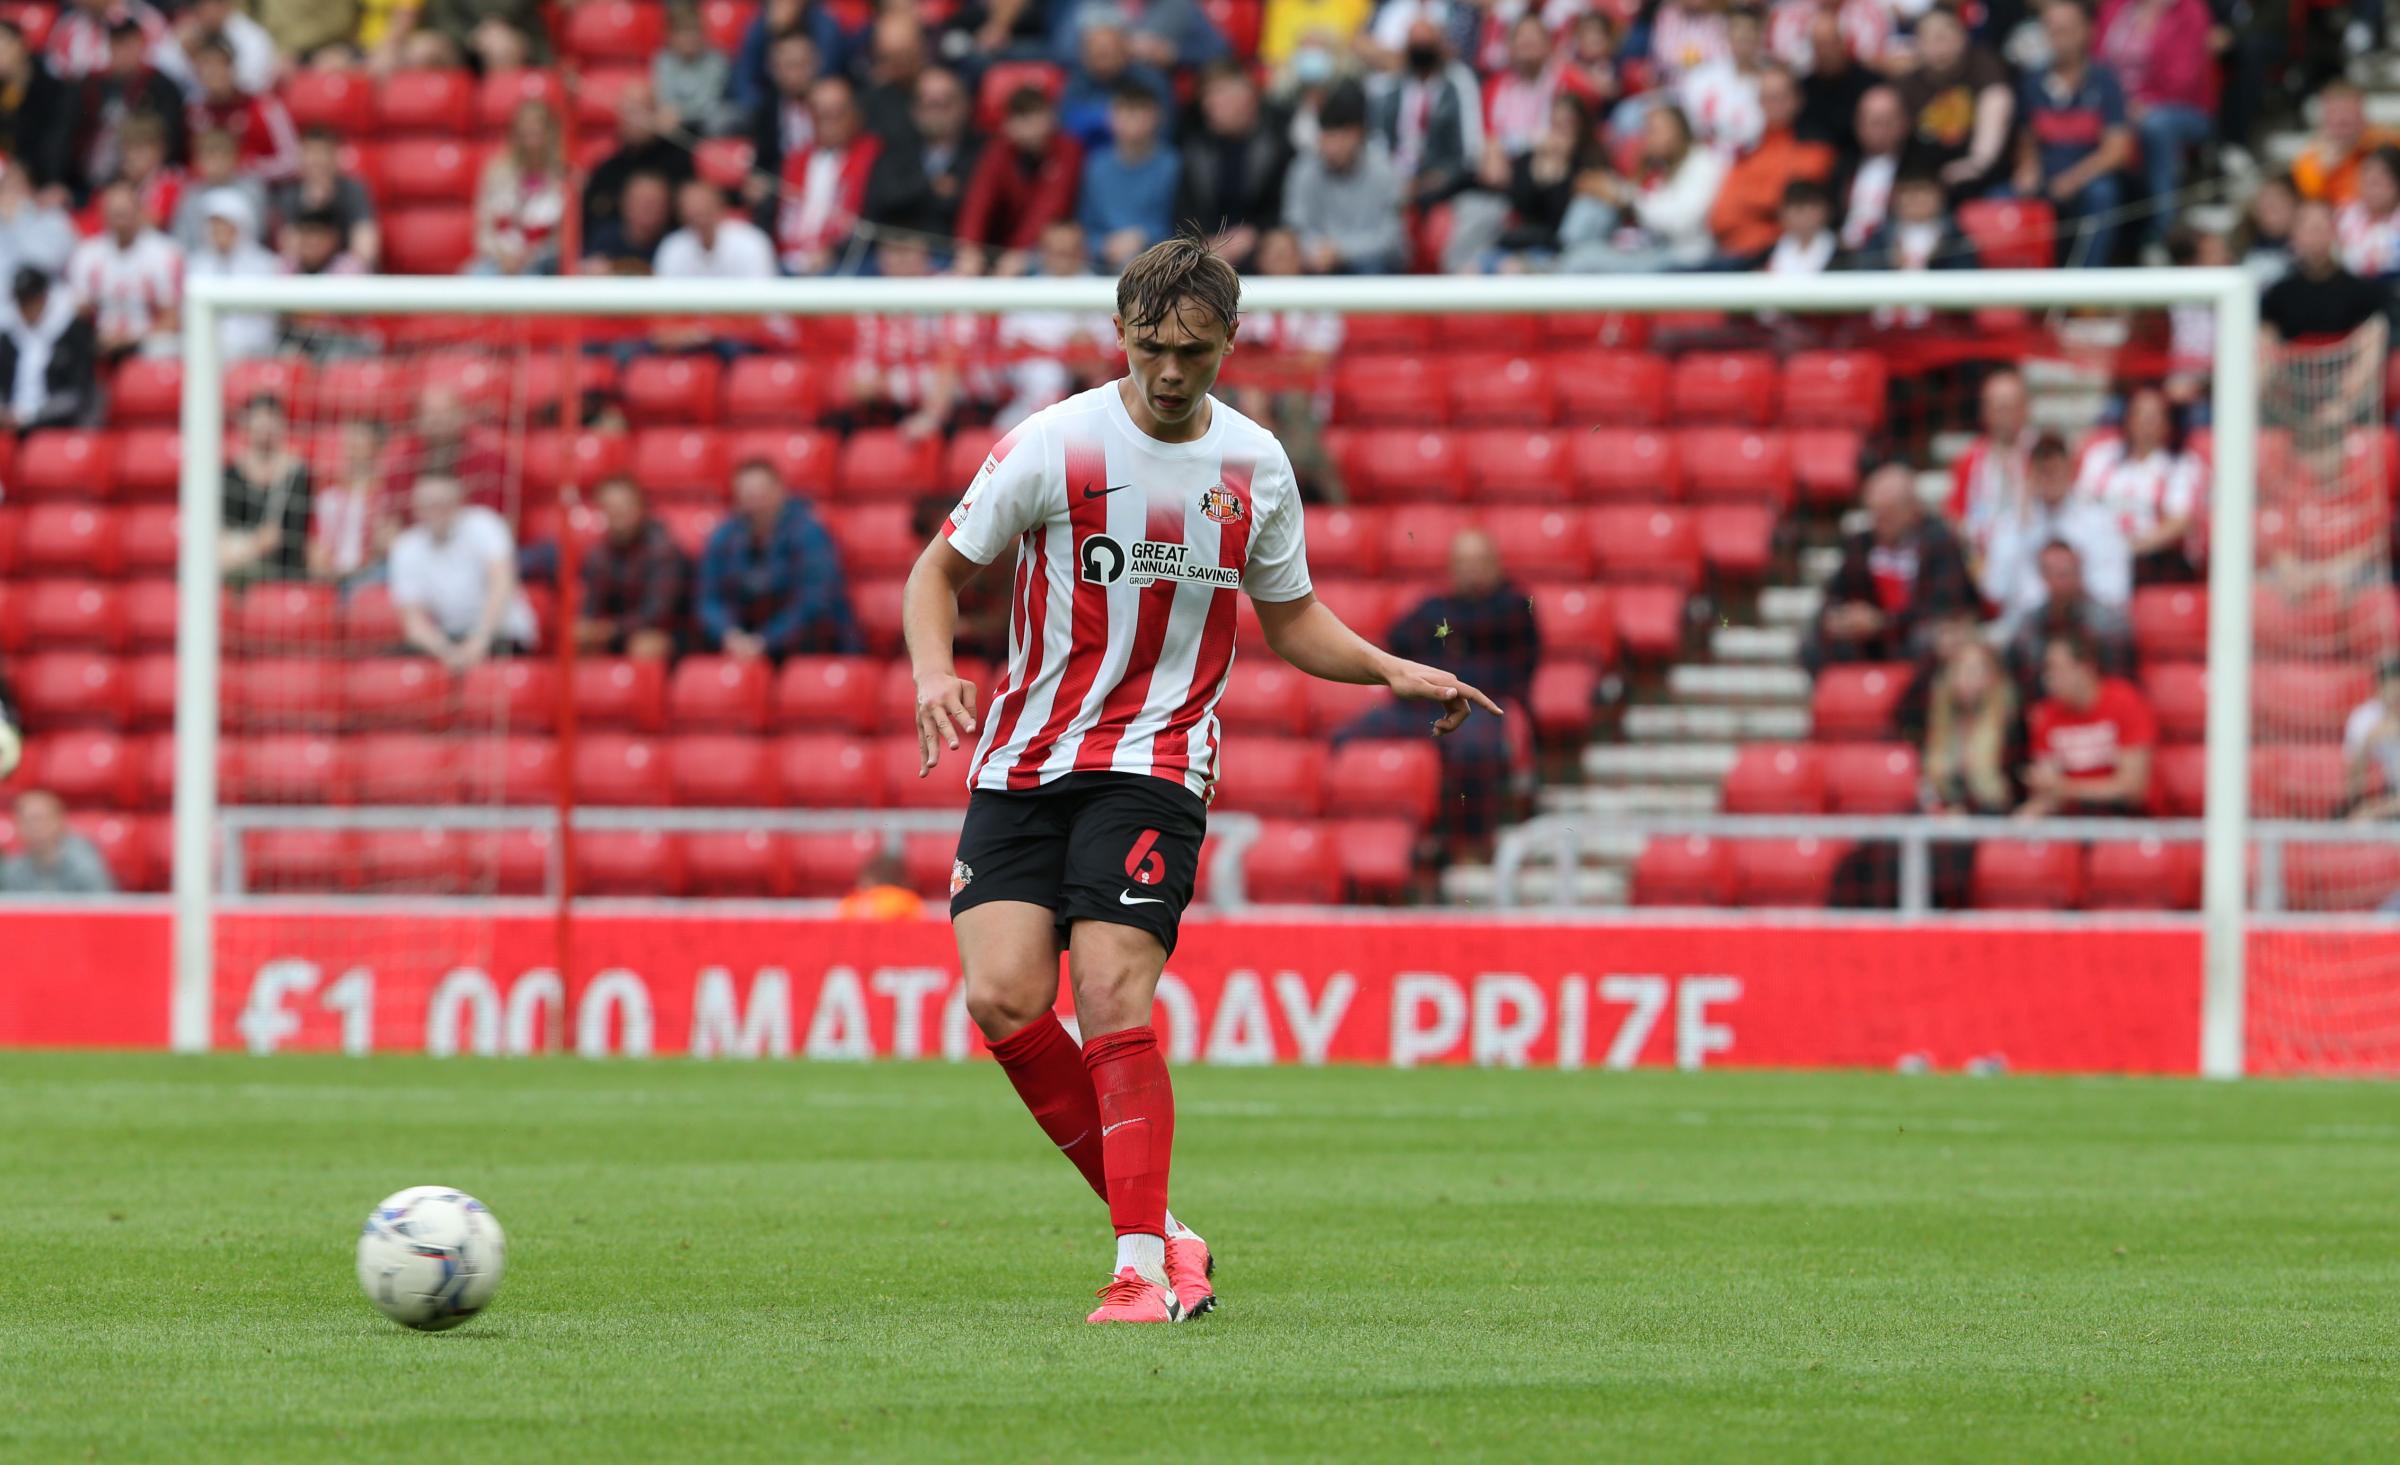 Callum Doyle to face former side Sunderland on opening day on the season